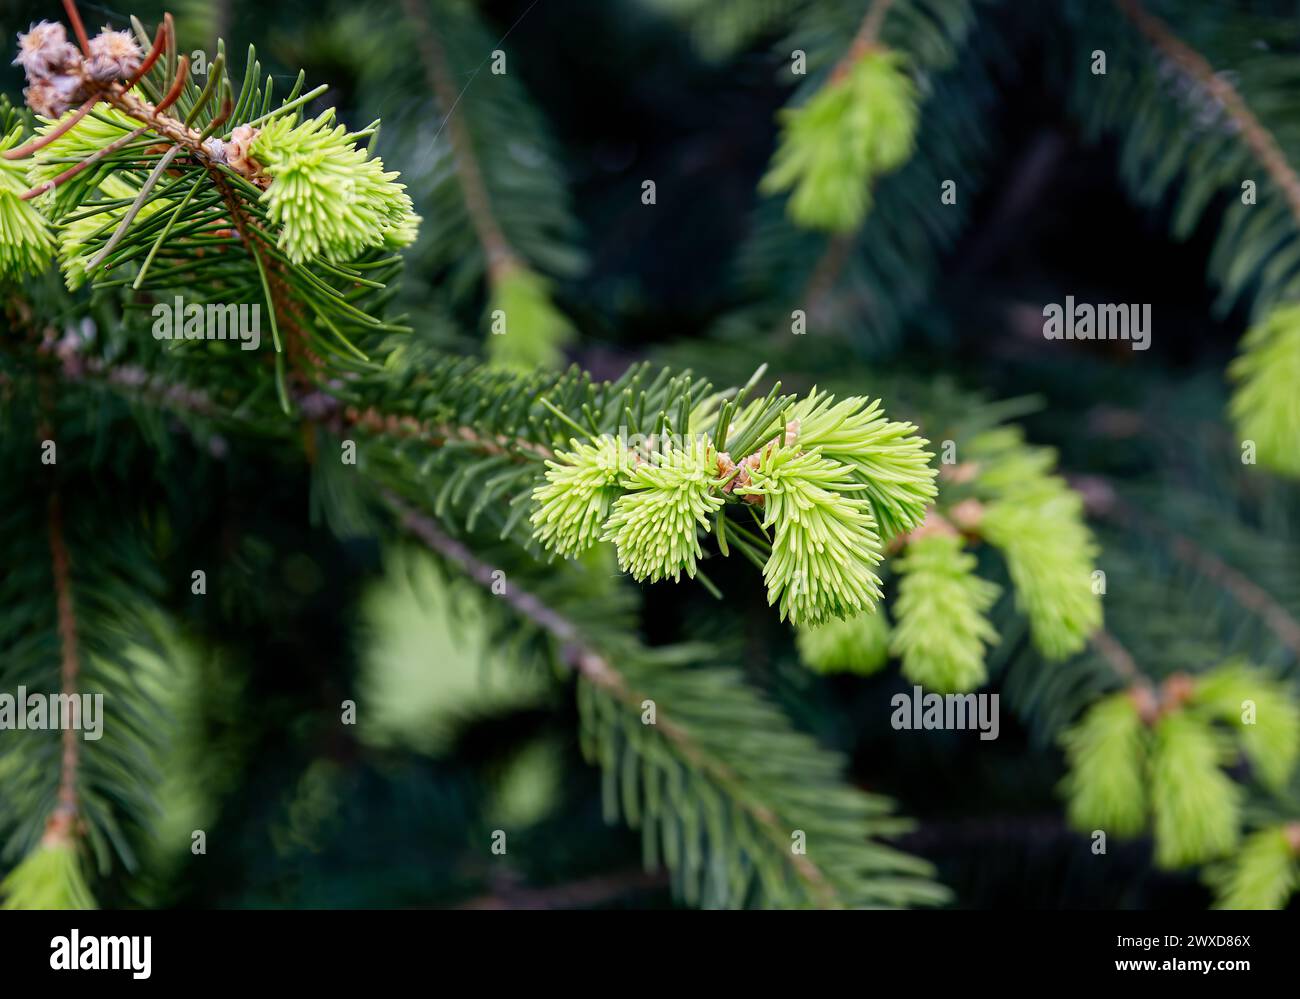 image of young needles on a coniferous tree Stock Photo